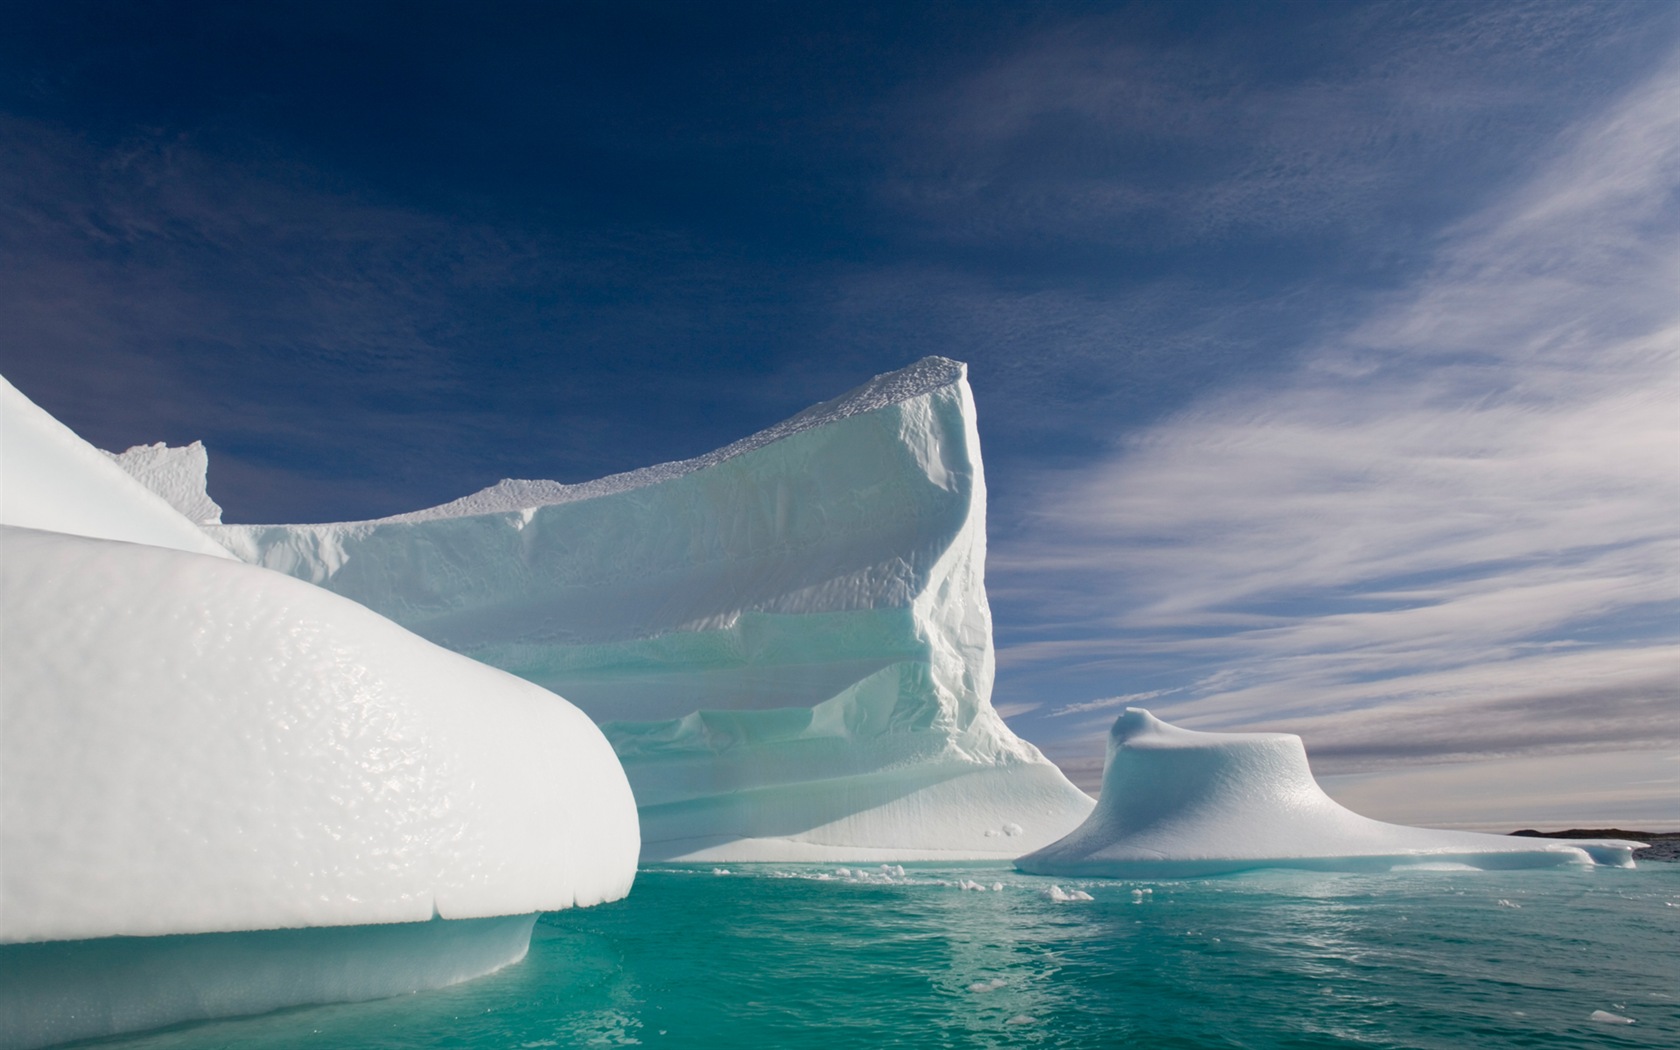 Windows 8 Wallpapers: Arctic, the nature ecological landscape, arctic animals #14 - 1680x1050